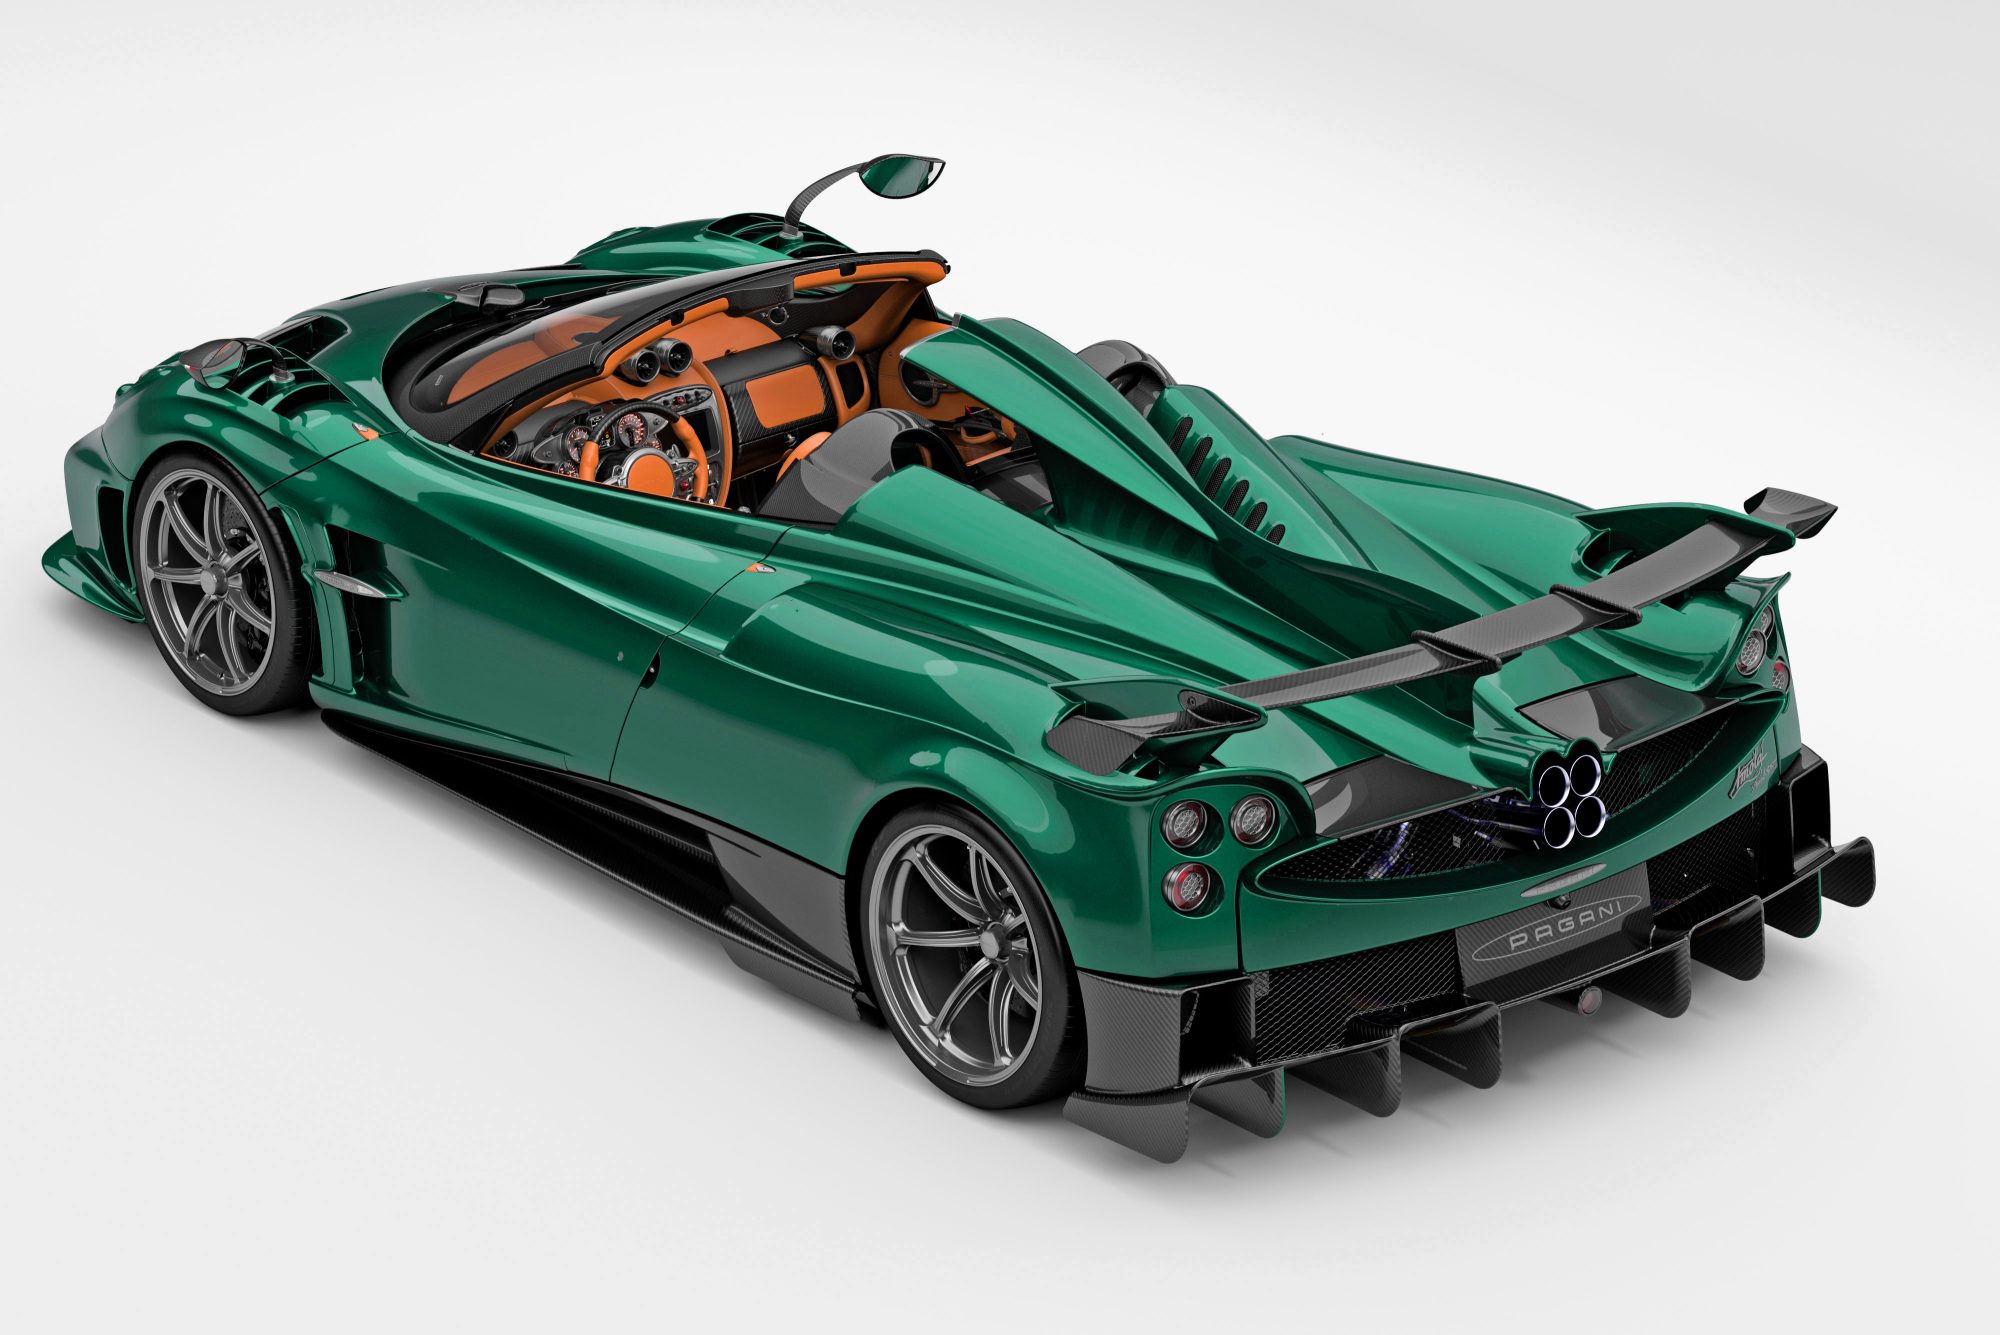 The Imola Roadster is Pagani’s homage to high-octane luxury